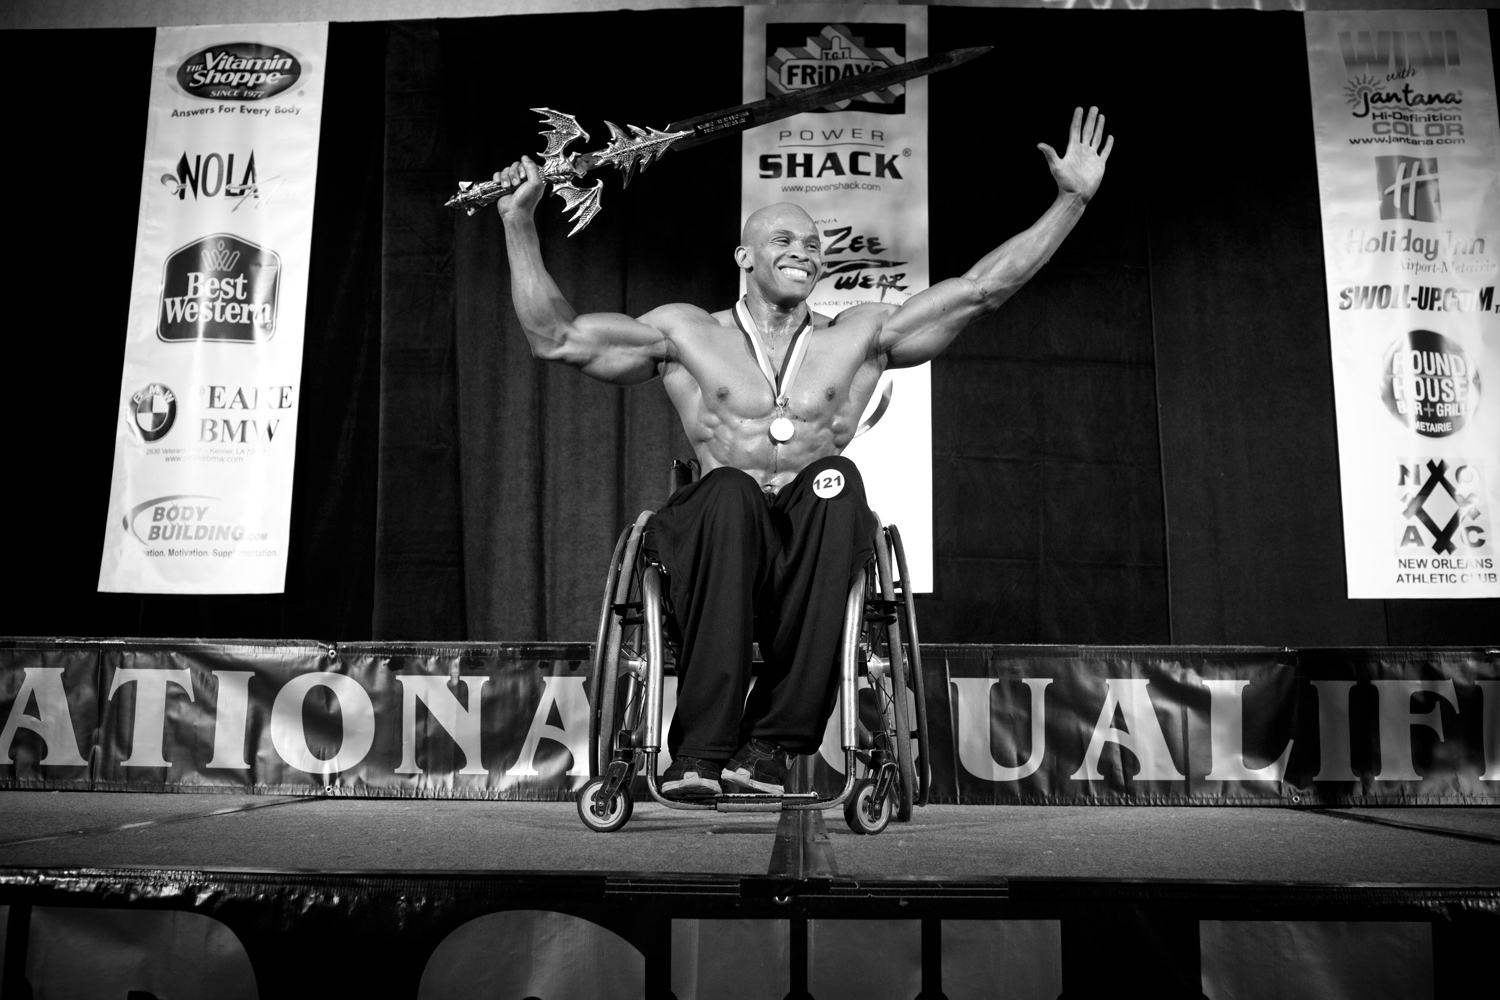 Harold Kelley holds up his trophy after winning first place at the NPC Wheelchair Nationals in Metairie, La.